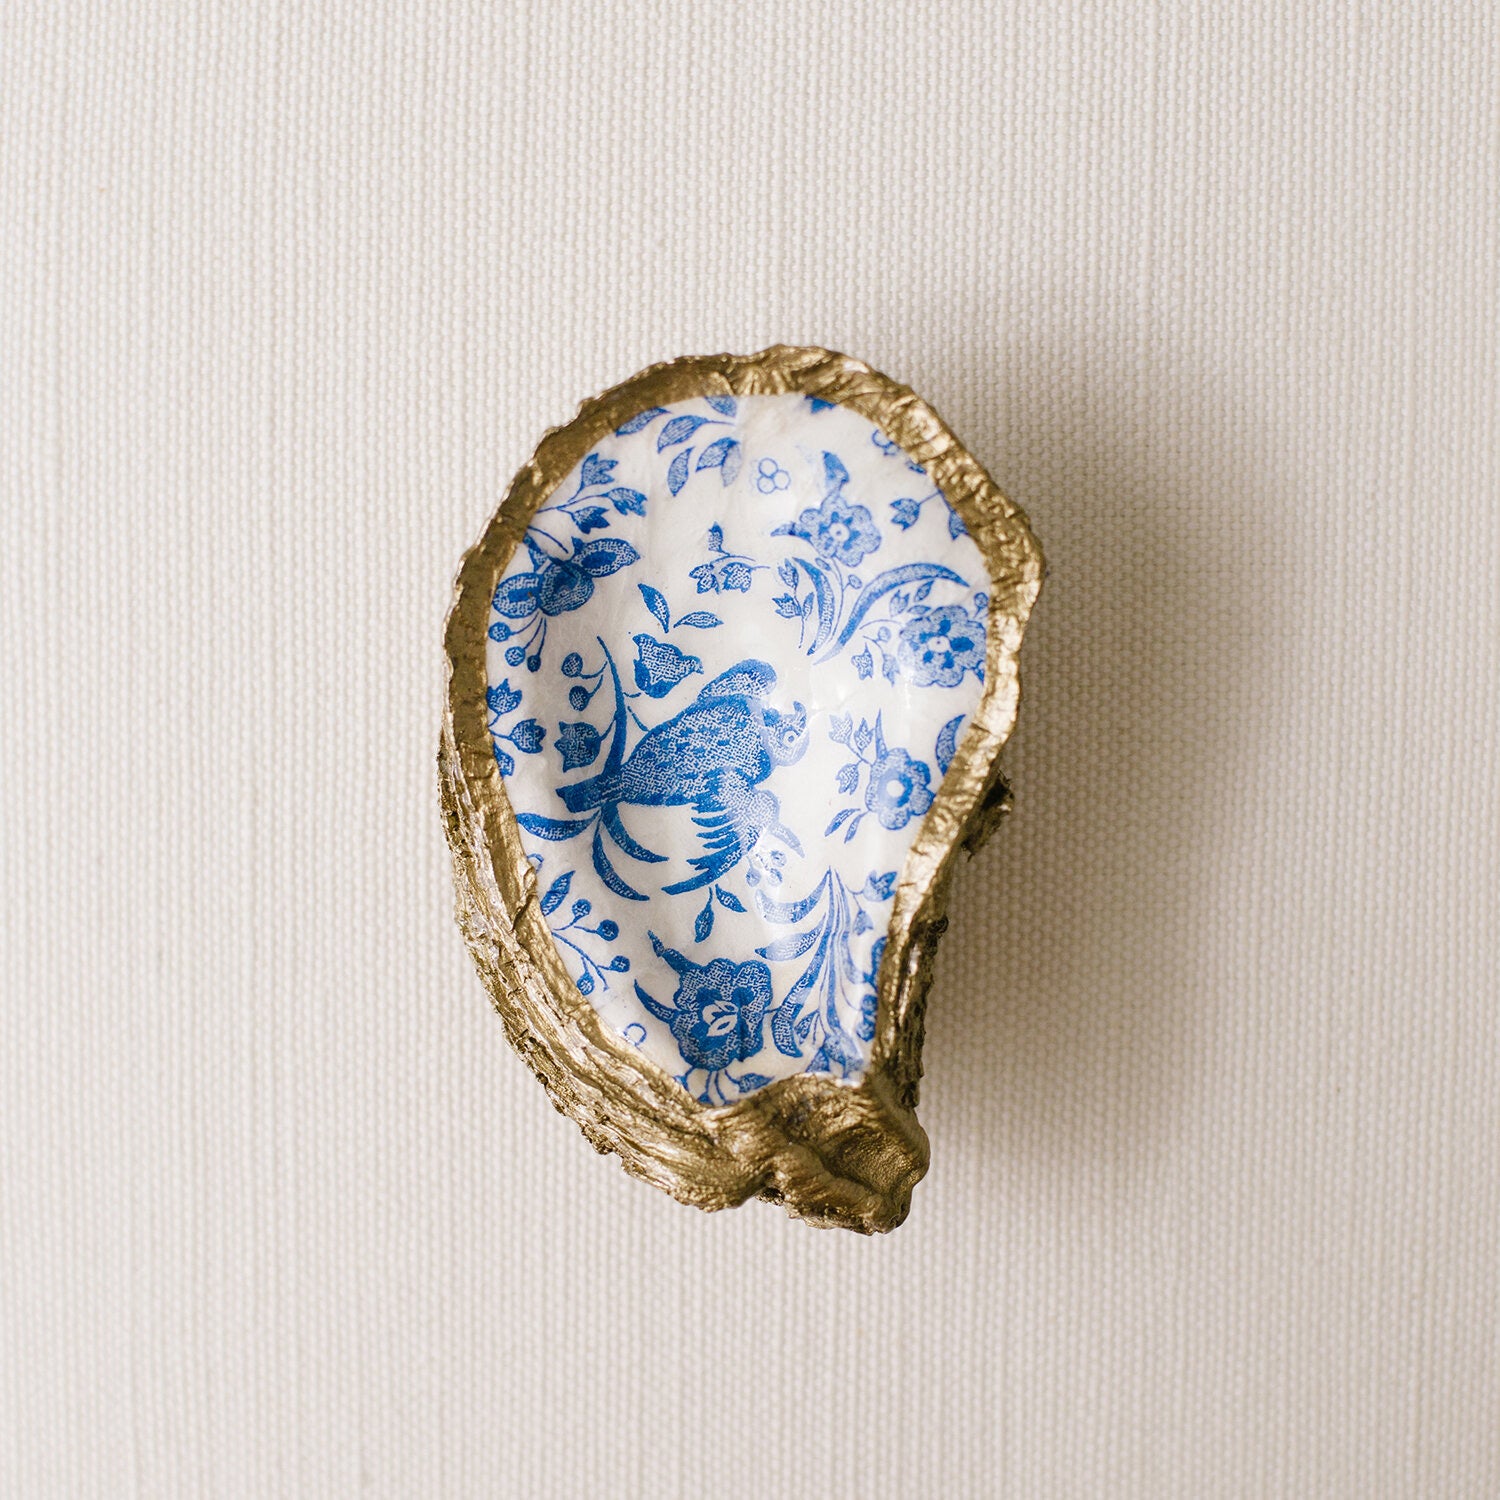 Grits & Grace painted oyster - Indigo Floral